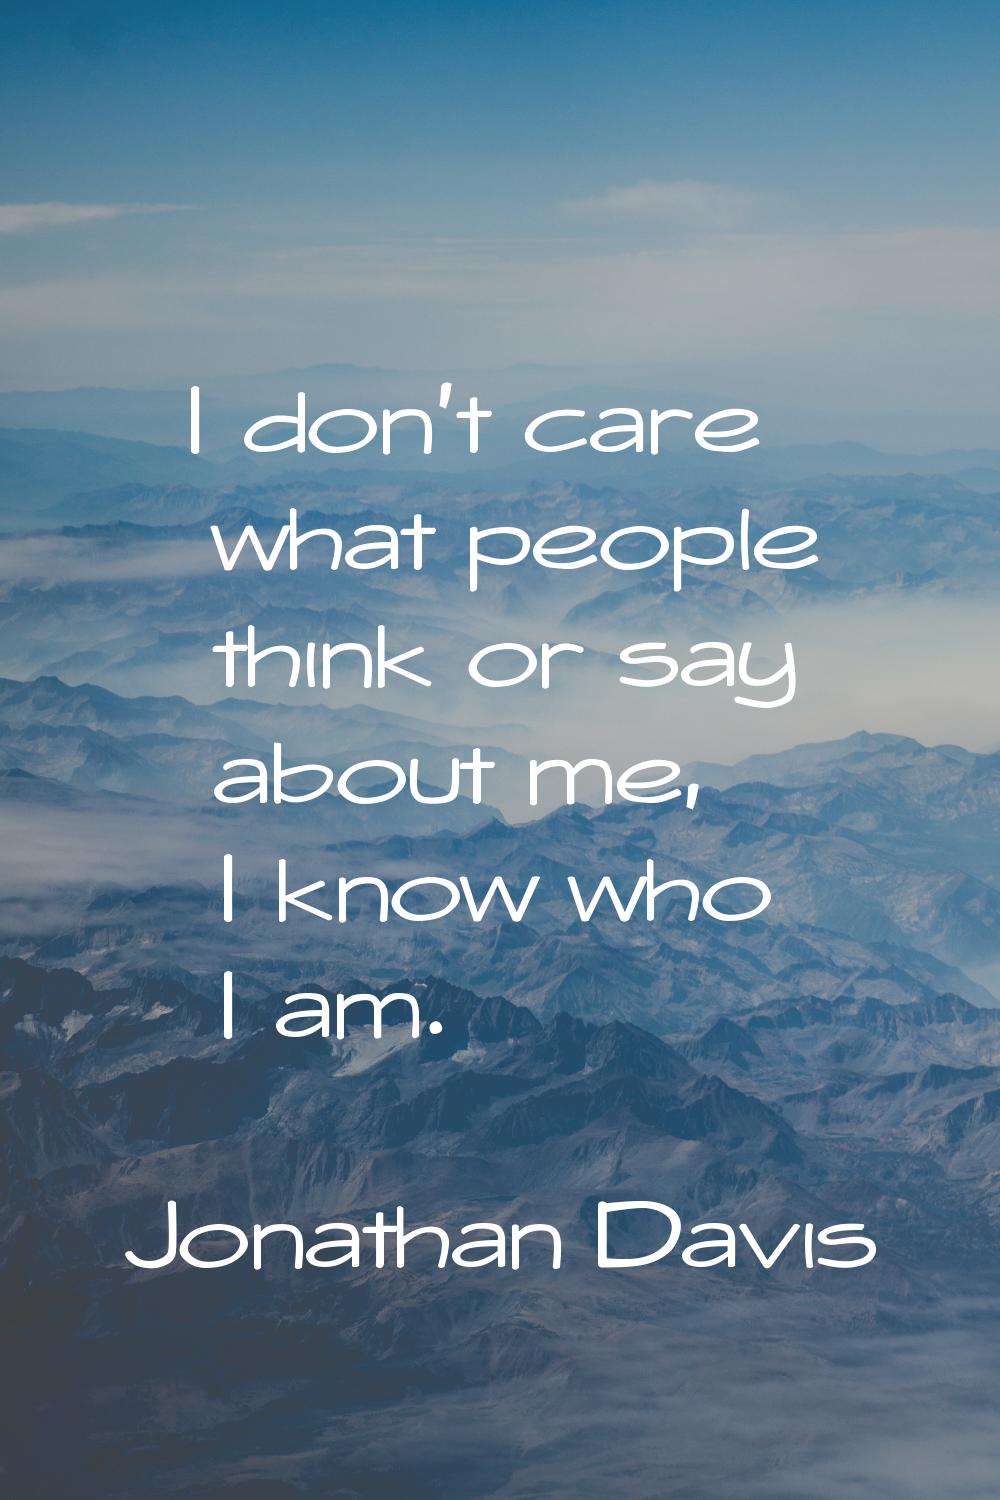 I don't care what people think or say about me, I know who I am.